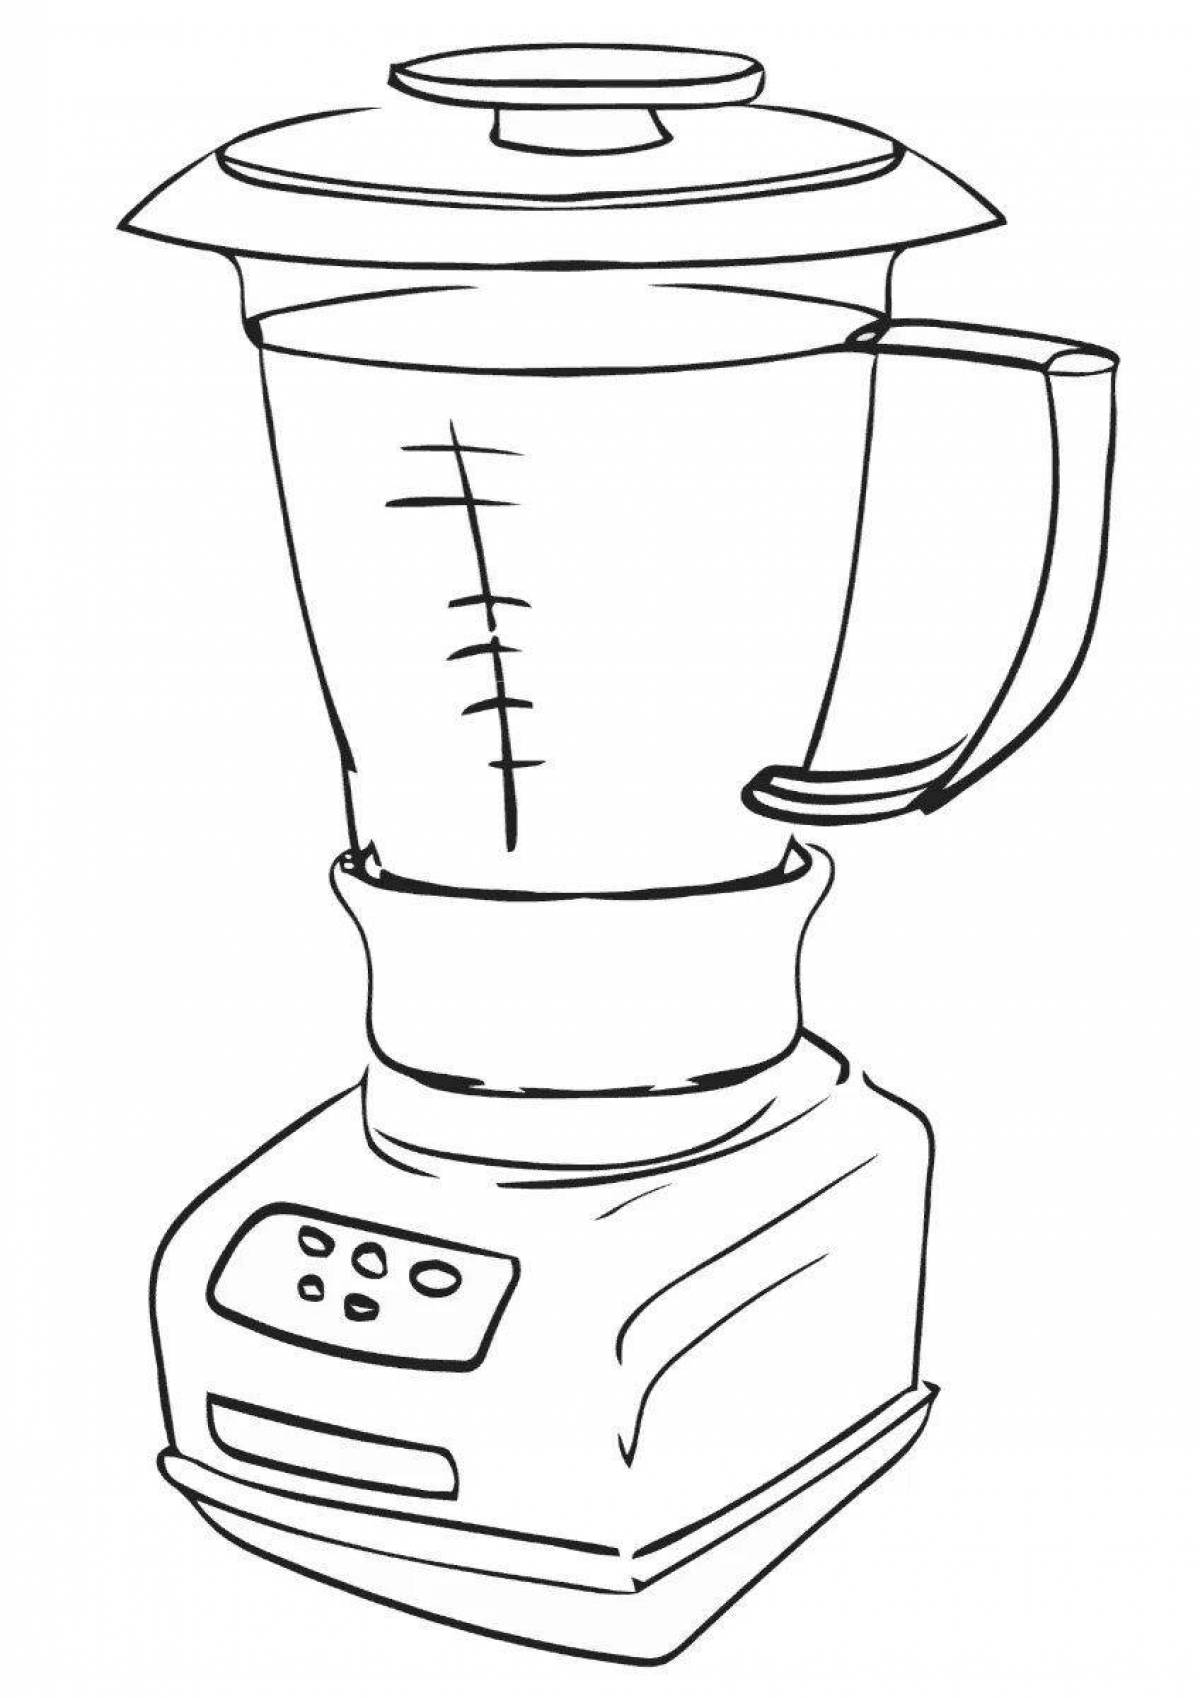 Coloring page daring home appliances